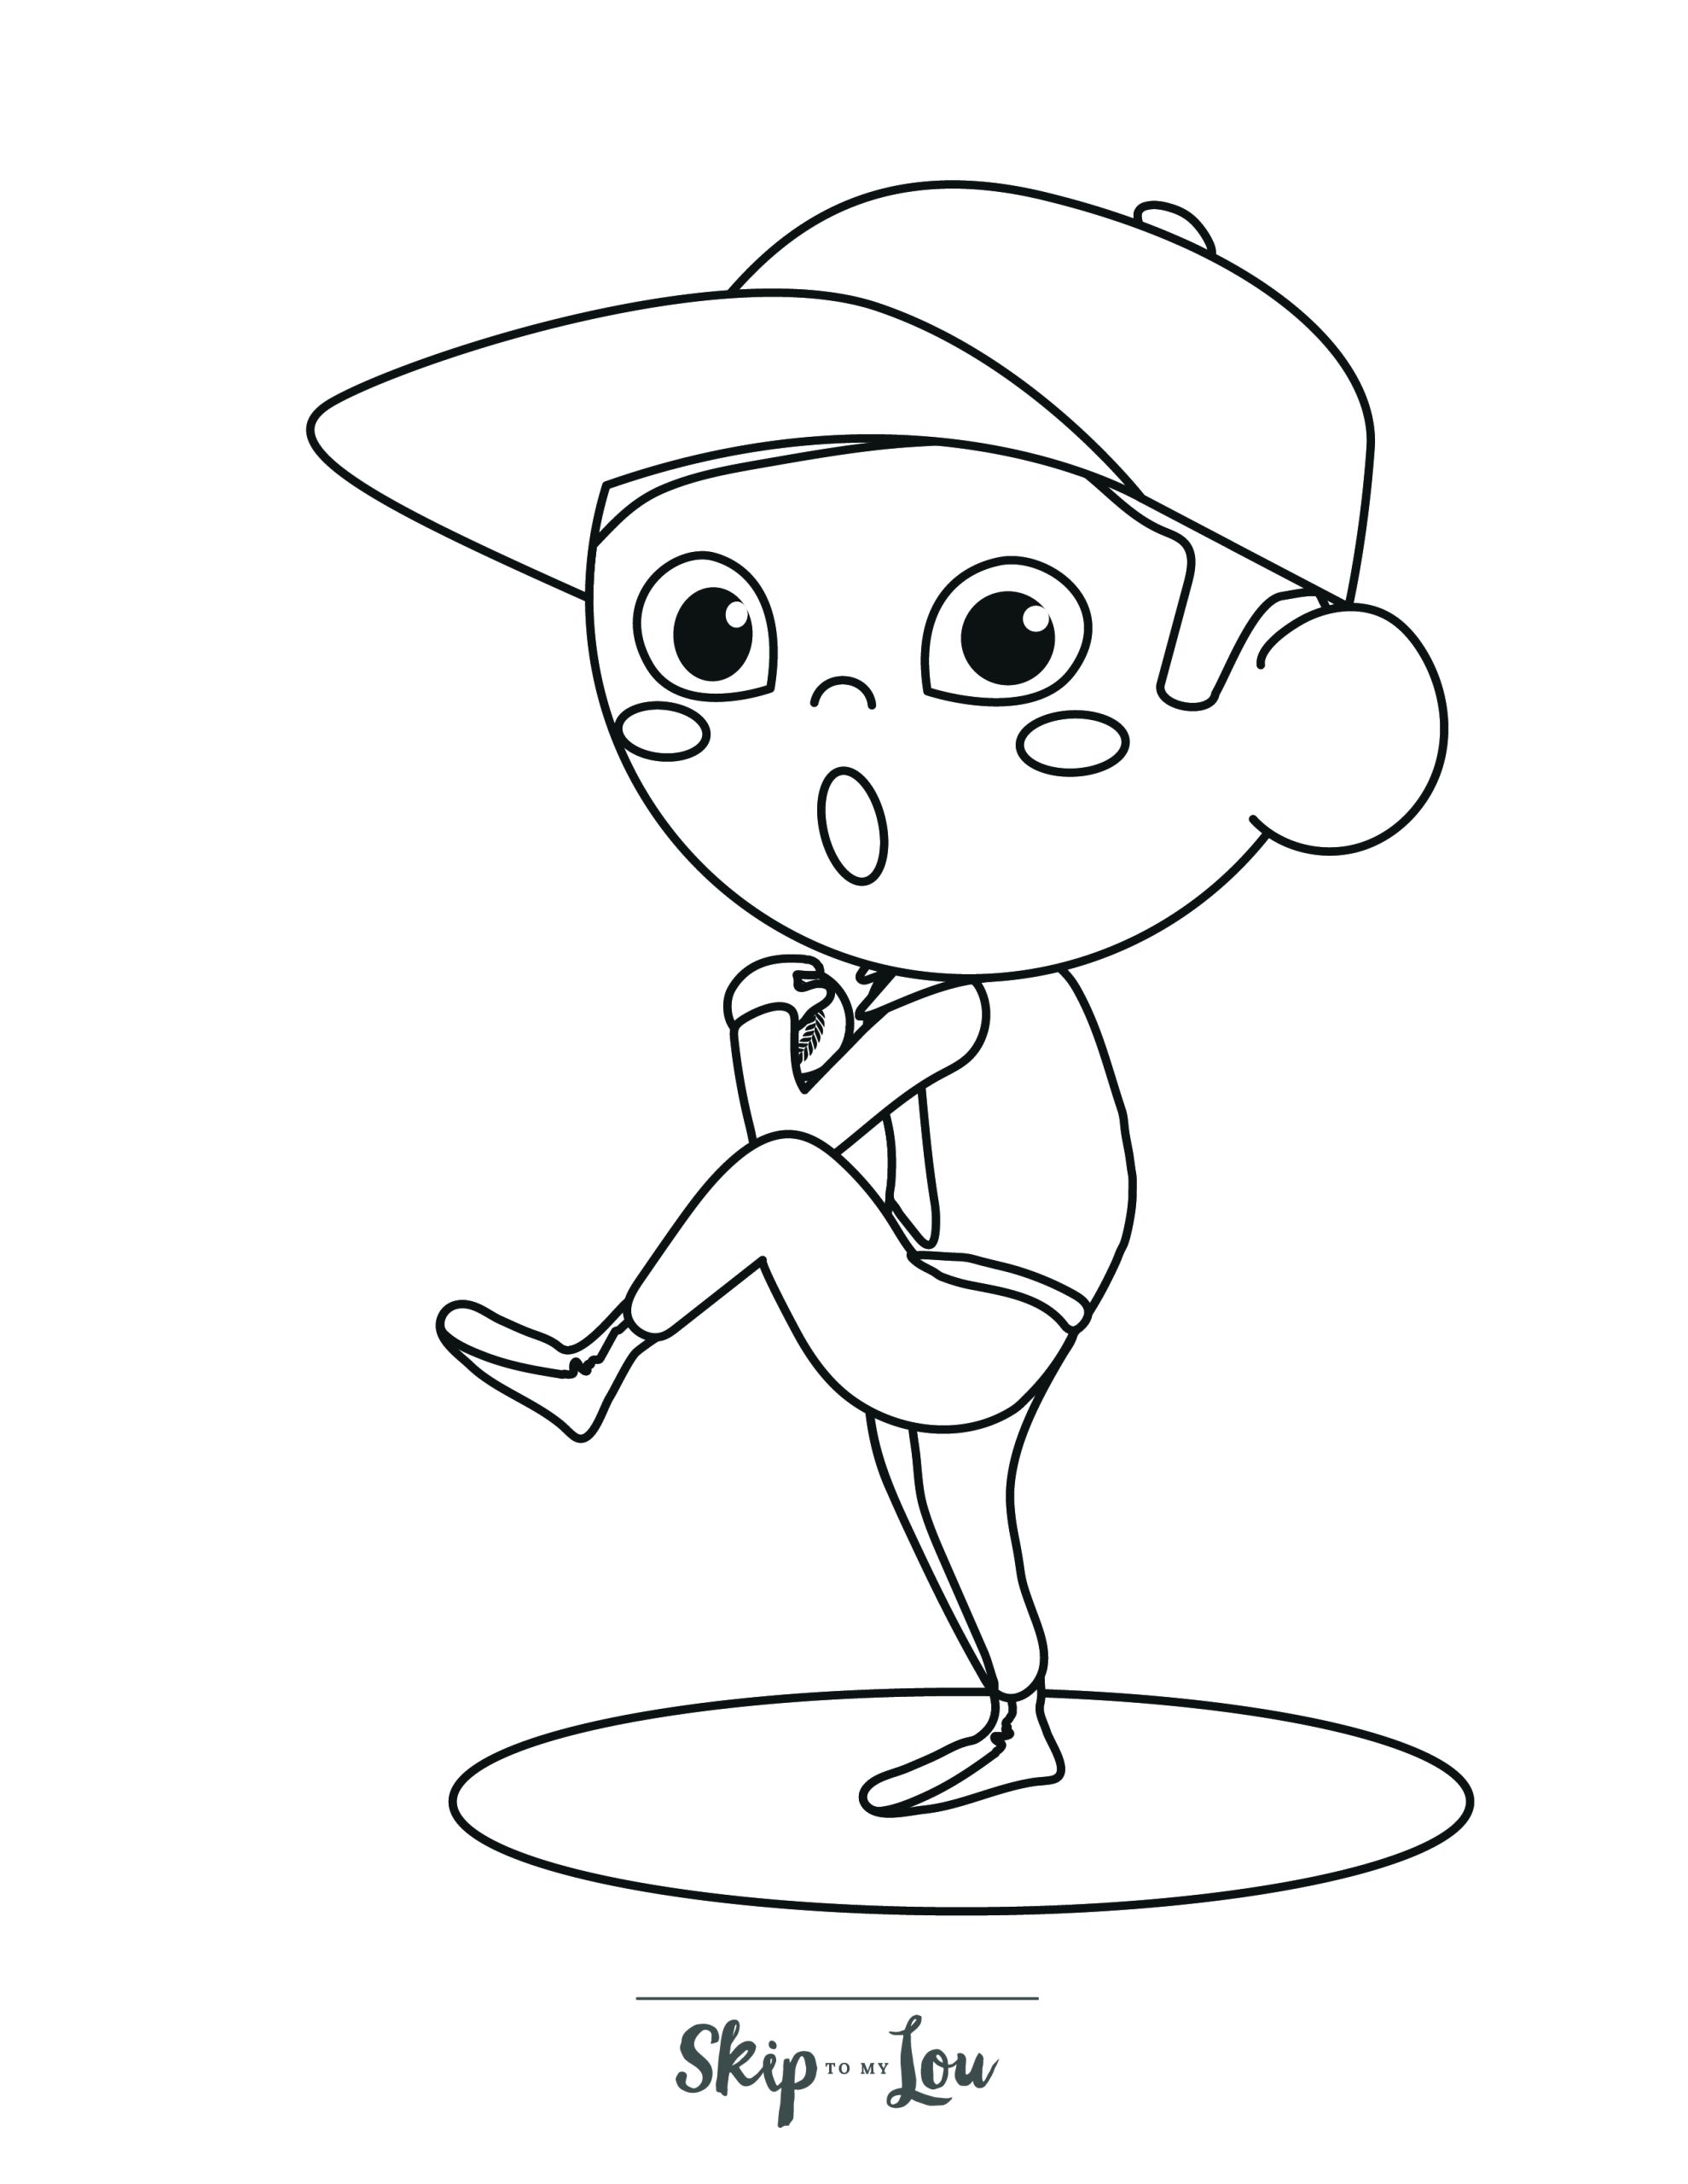 Baseball Coloring Page 3 - A line drawing of a baseball pitcher ready to throw the ball. 